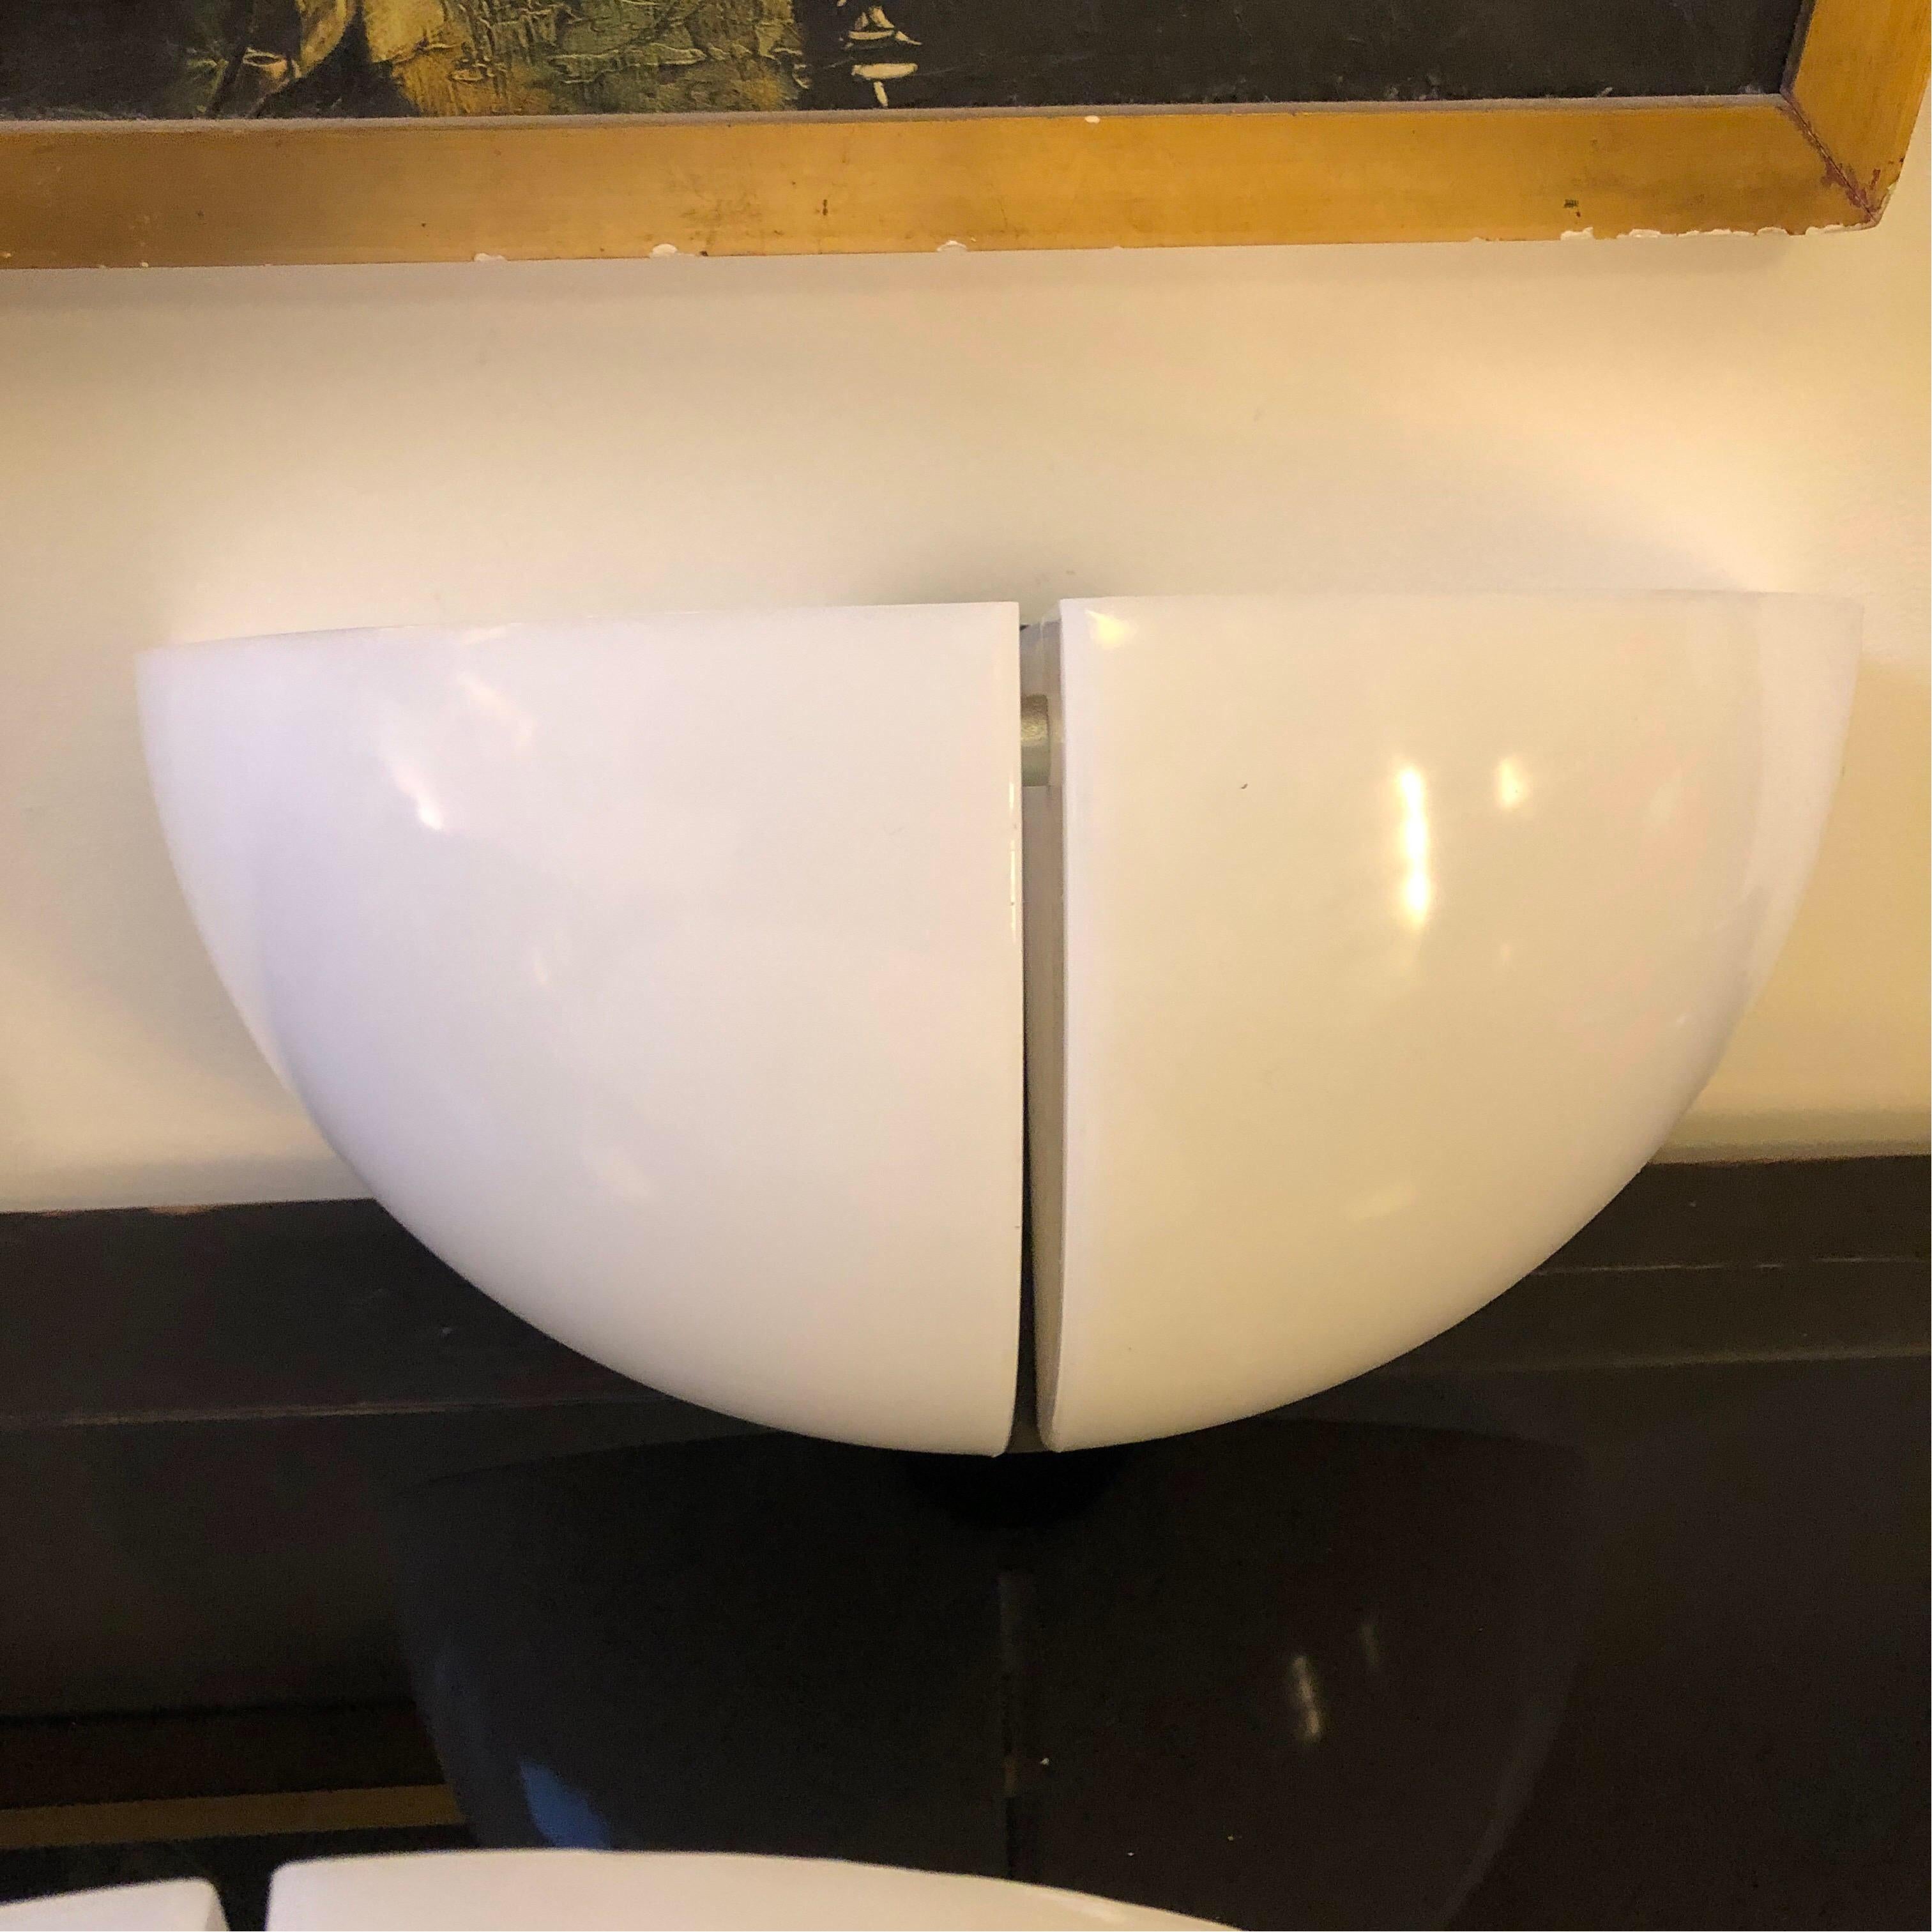 Two Stilnovo white plastic wall sconces made in Italy in the 1970s. They work 110-240 volts and need two regular e27 bulbs. Labeled and marked Stilnovo on the plastic.